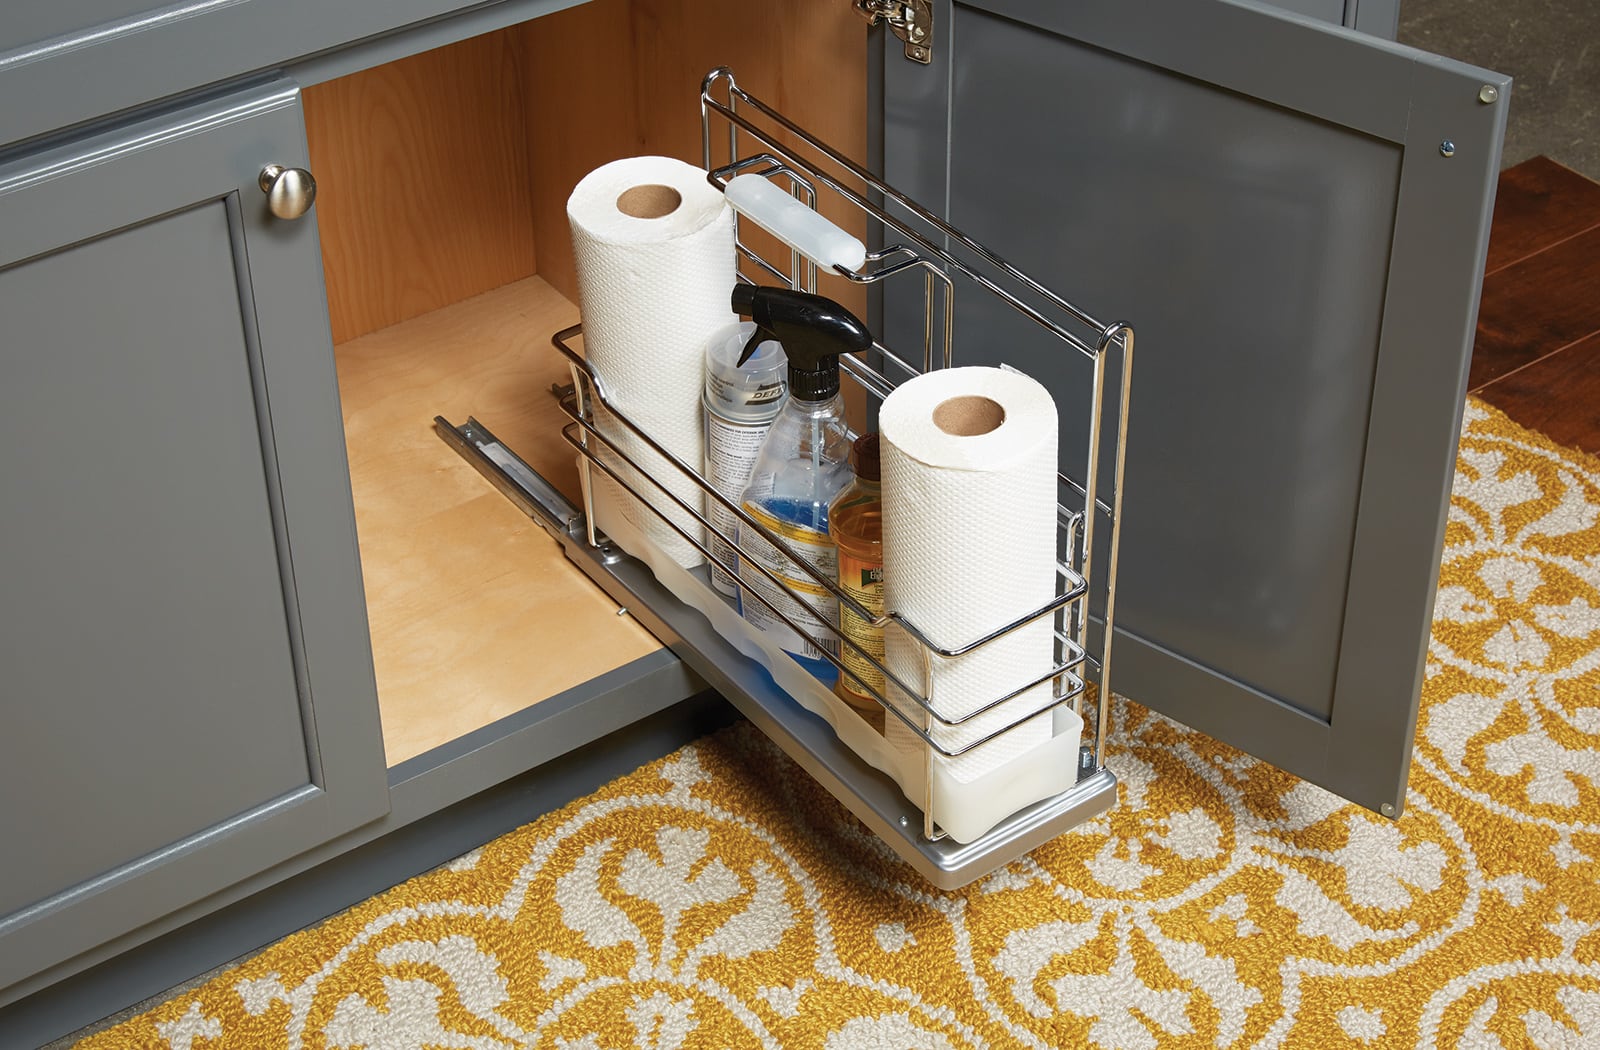 bathroom undersink caddy for paper towels and cleaners